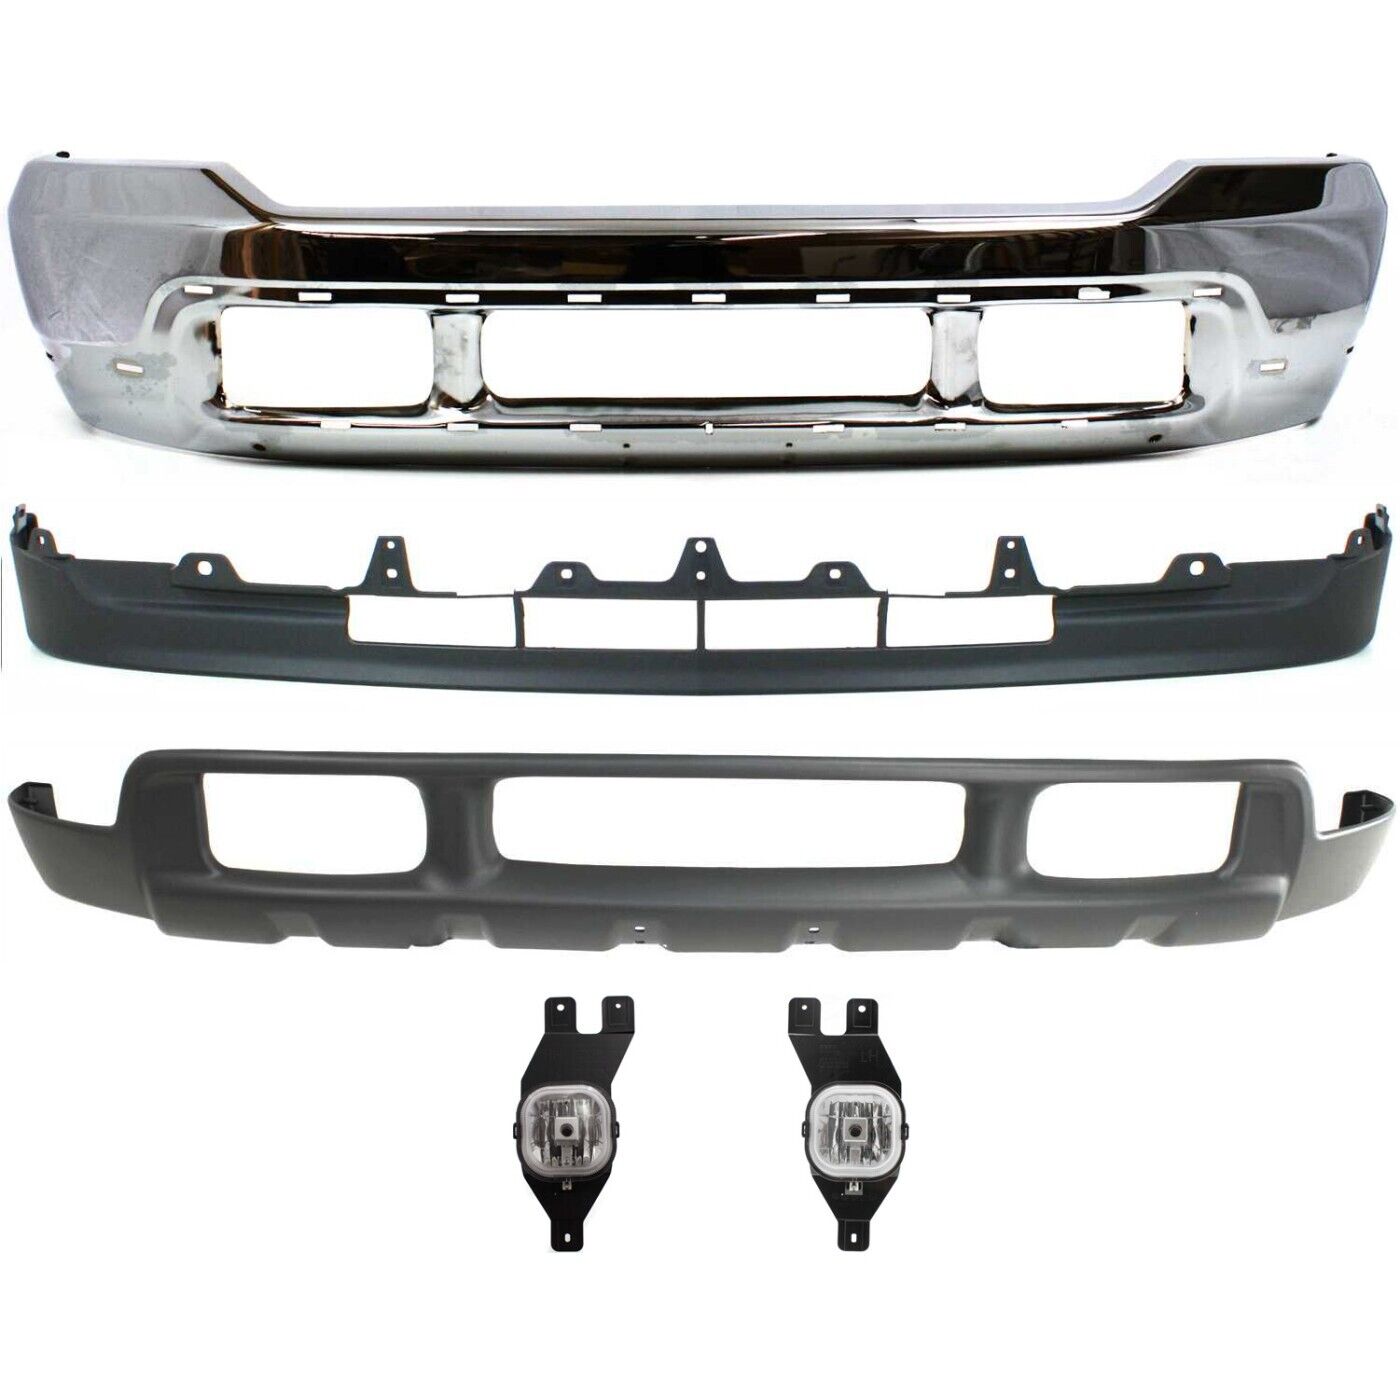 Front Bumper Kit For 2001-2004 Ford F-250 Super Duty with Fog Lights